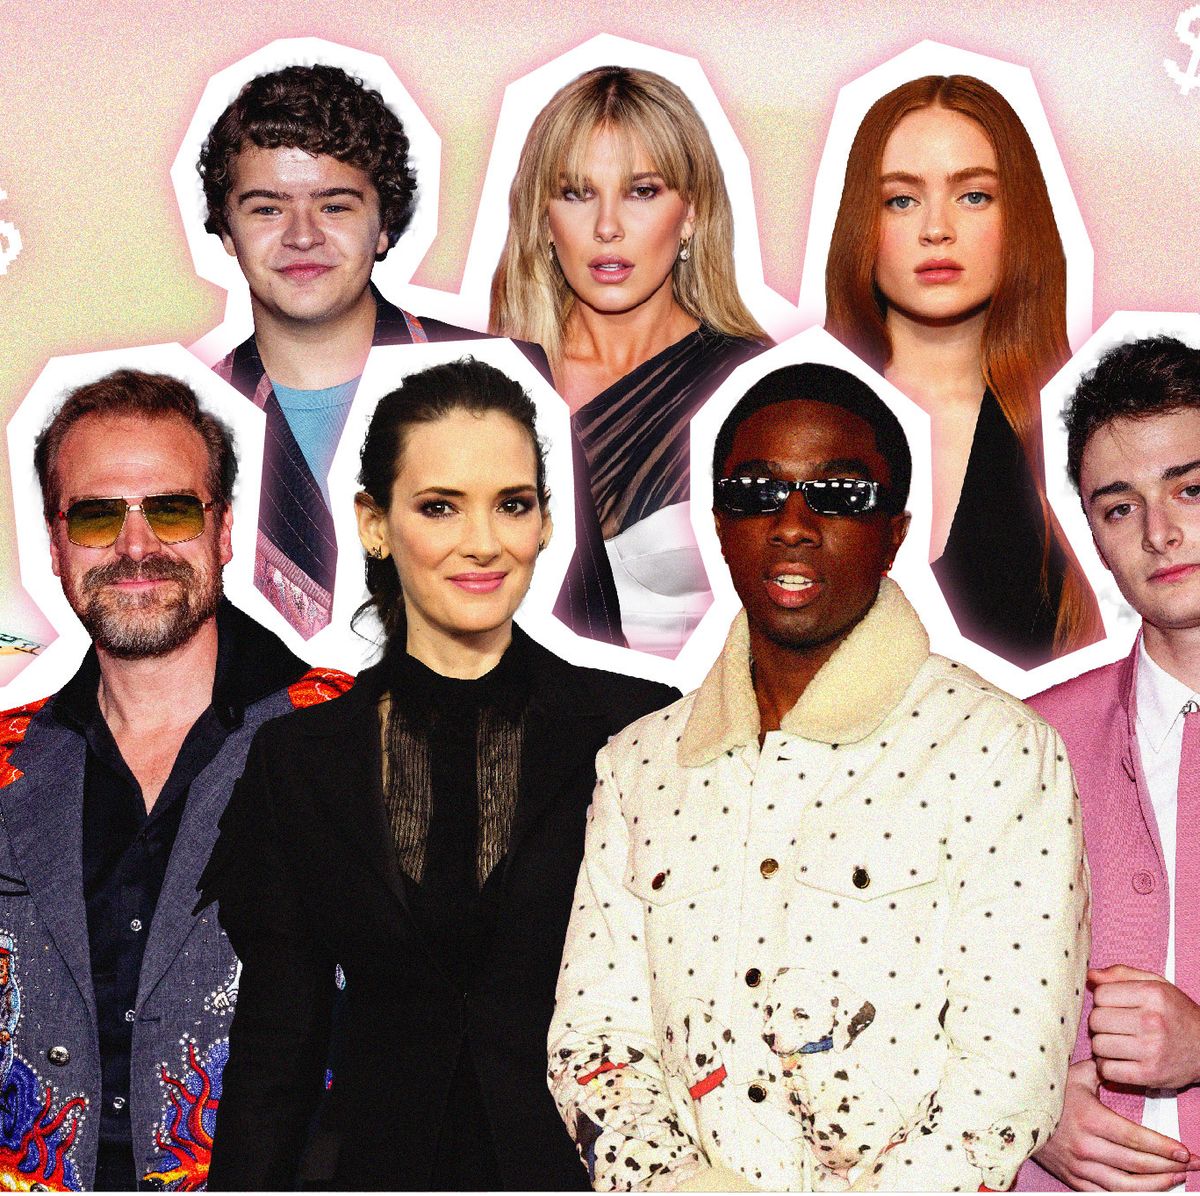 Stranger Things season 4 cast: Who will return in the Netflix show series?